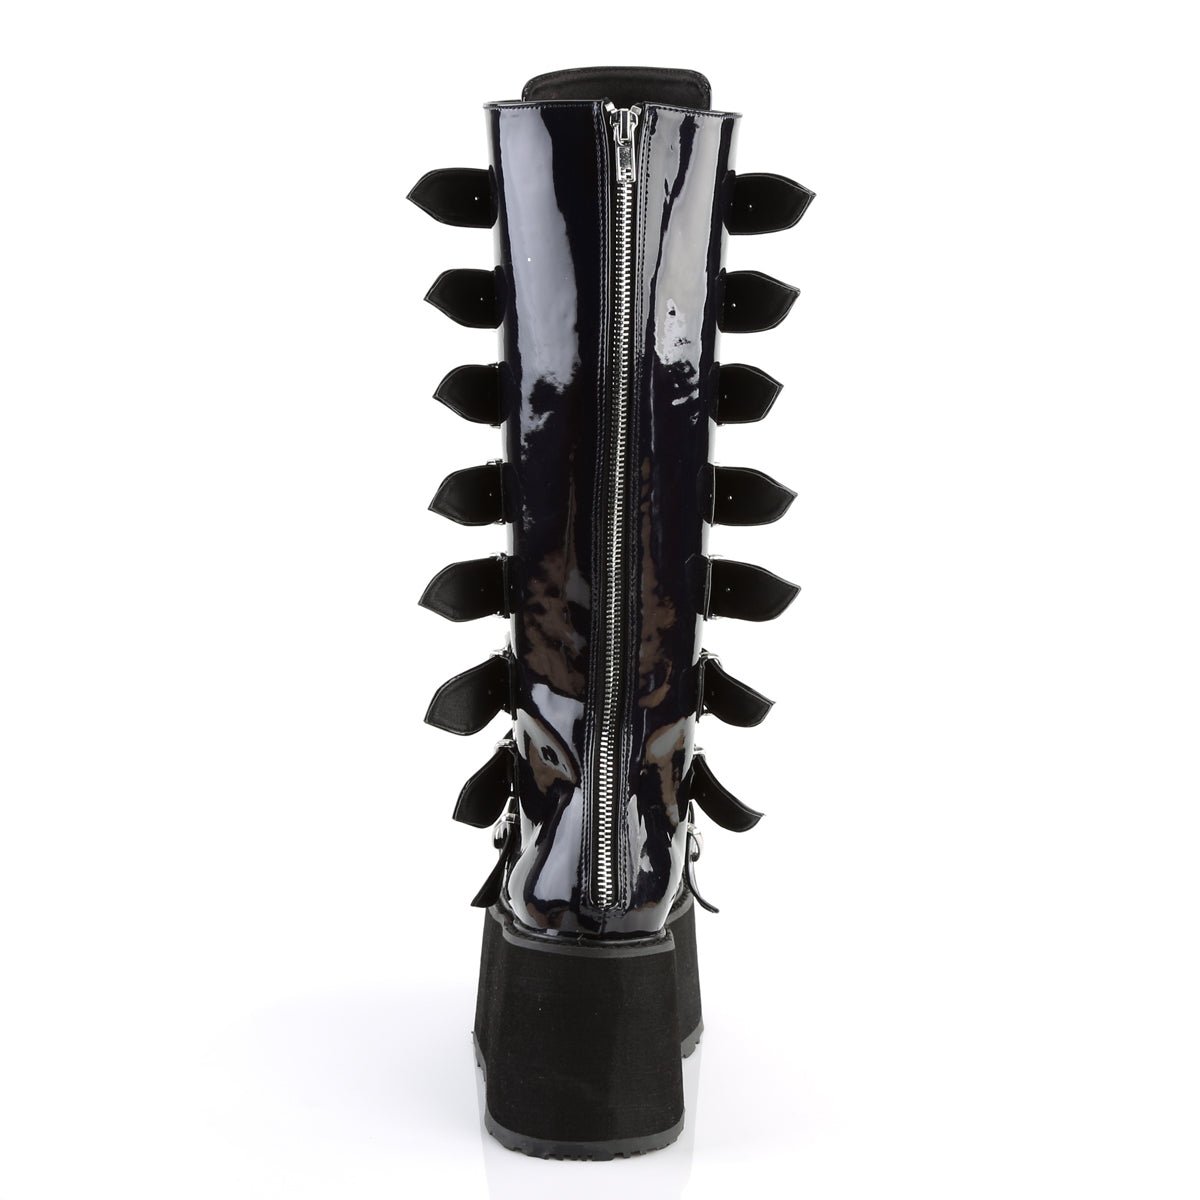 Too Fast | Demonia Damned 318 | Black Holographic Vegan Leather Women&#39;s Knee High Boots